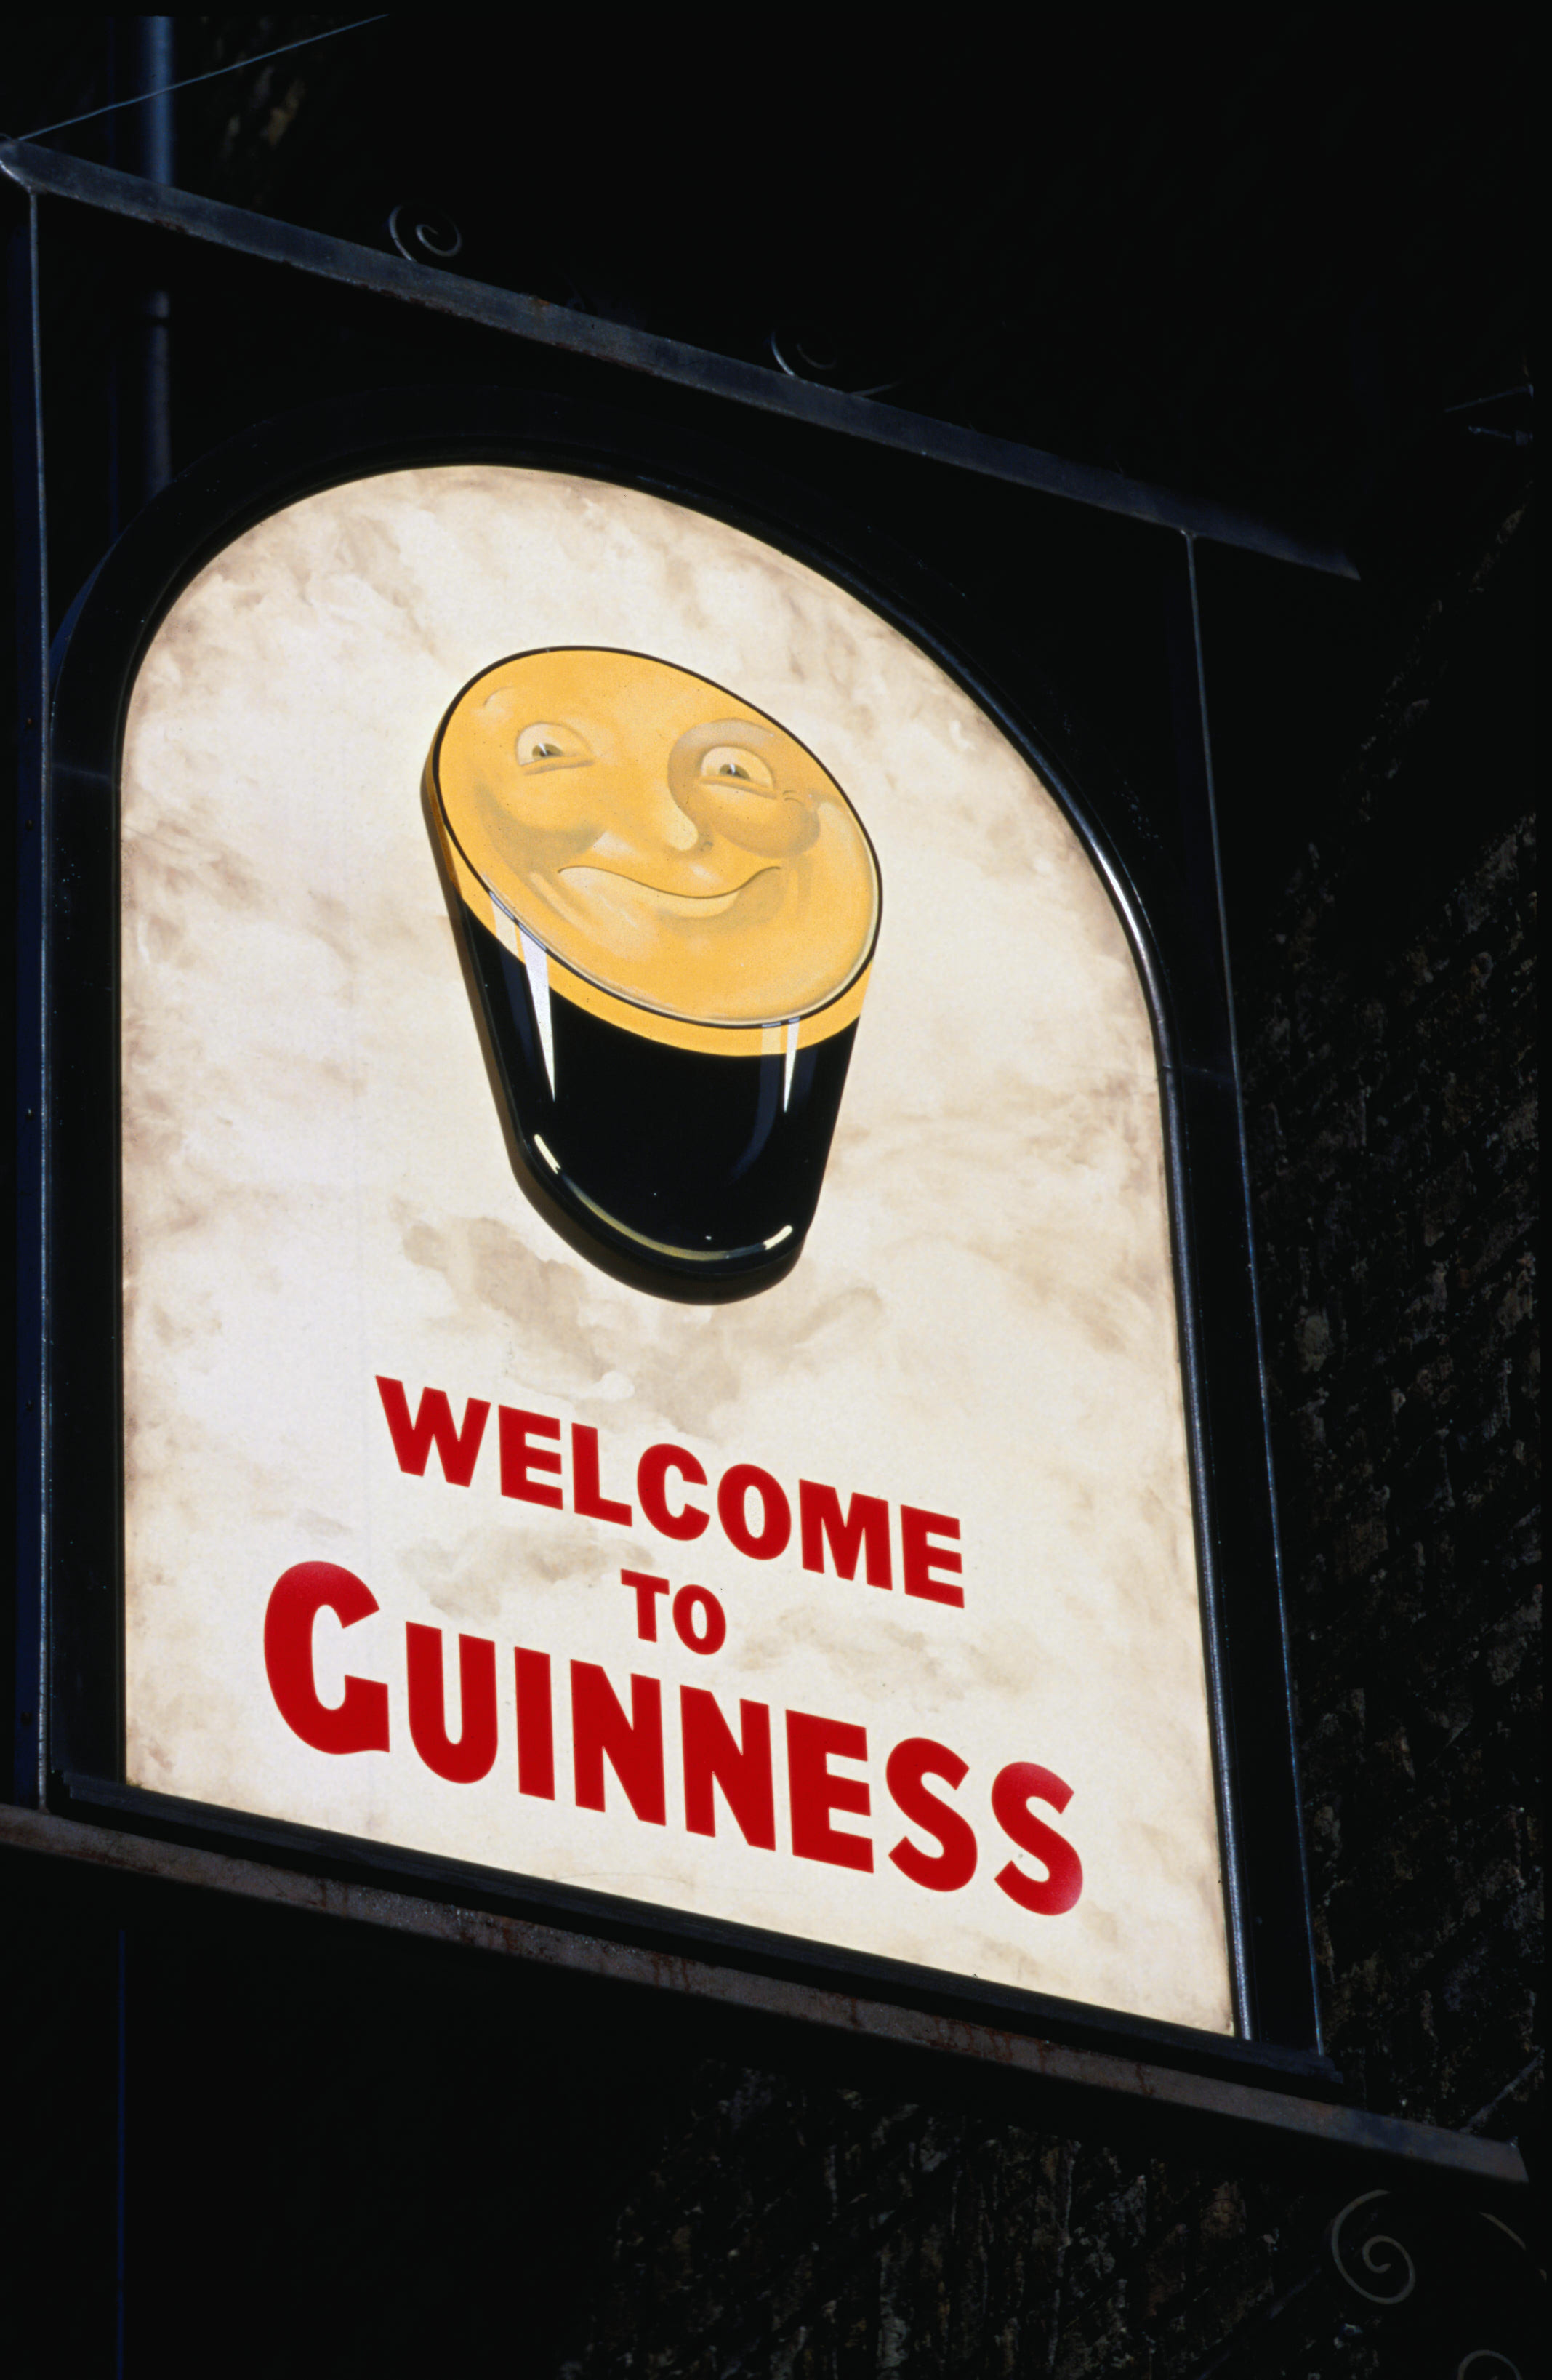 Arthur Guinness signed a 9,000 year lease.